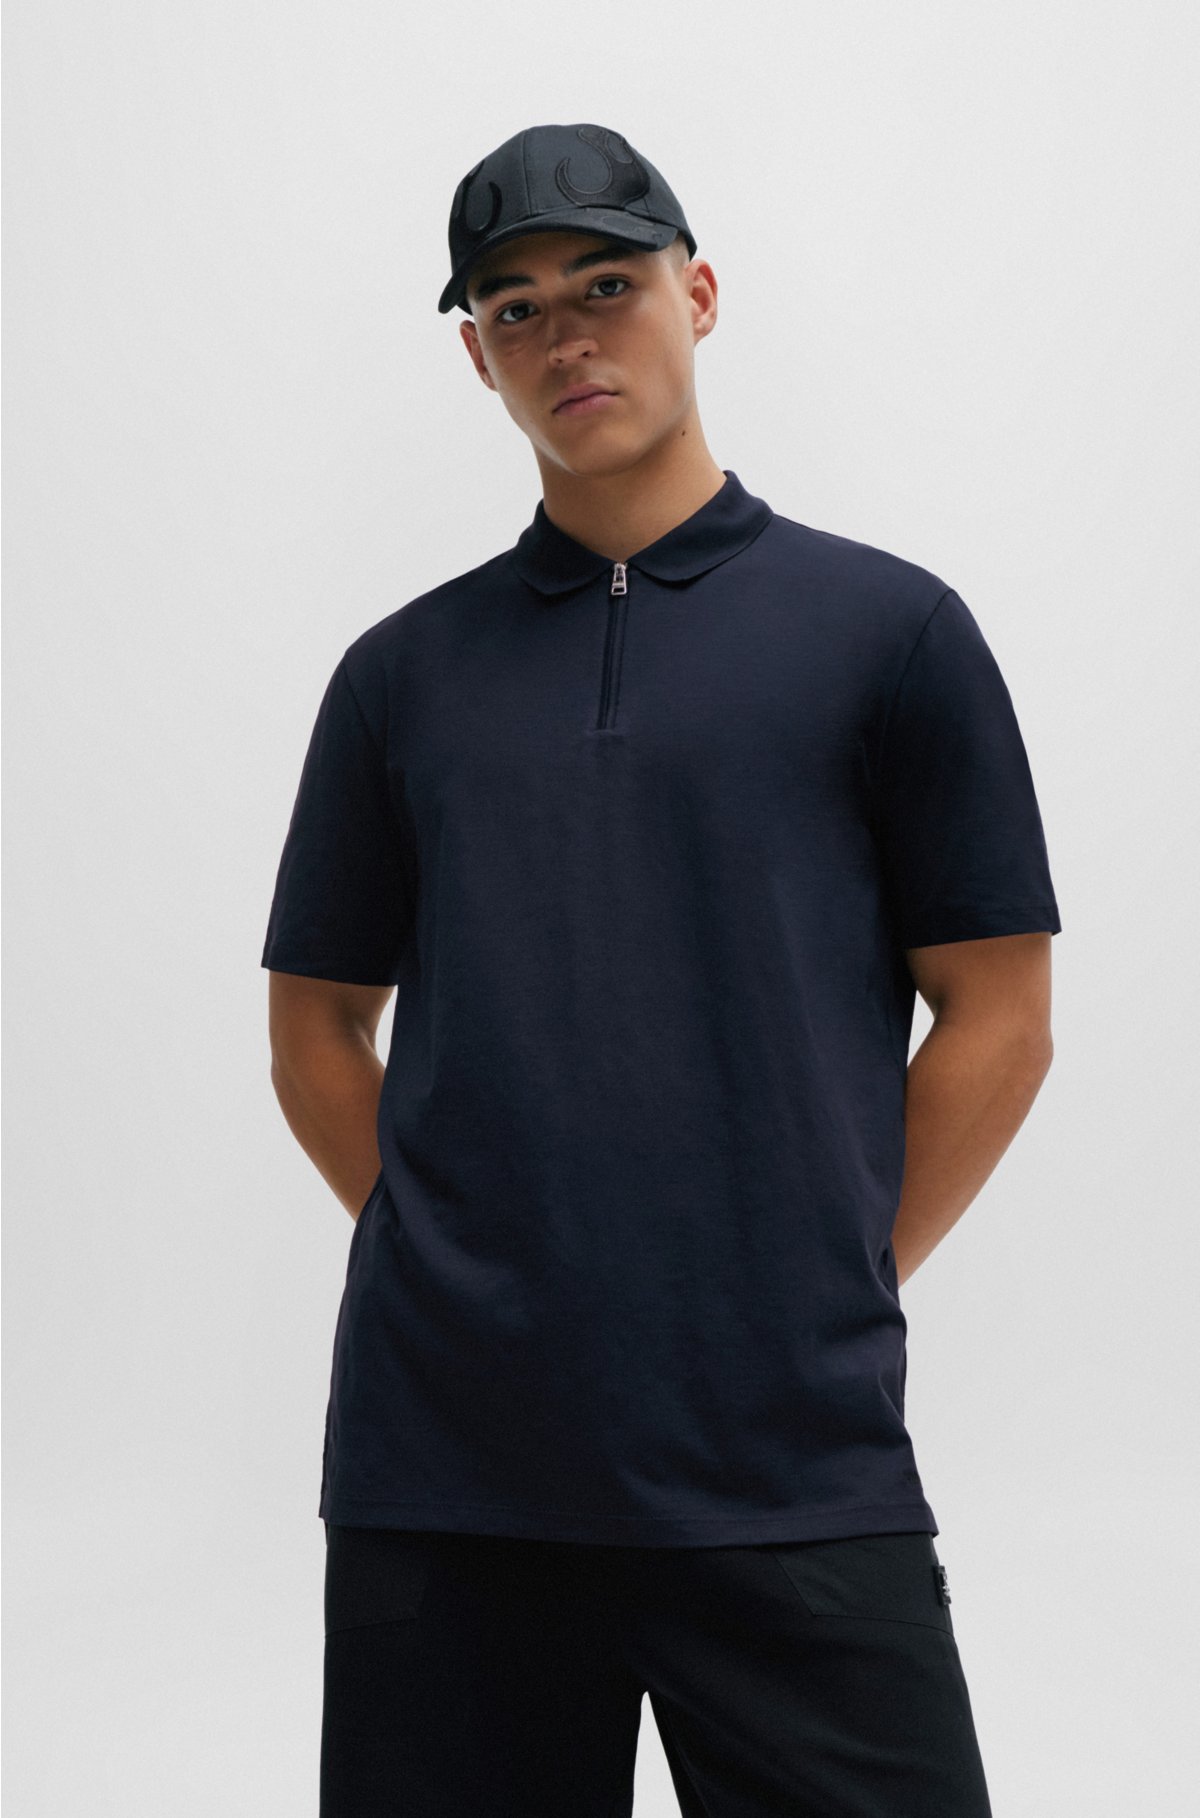 placket - zip HUGO with shirt polo Cotton-blend